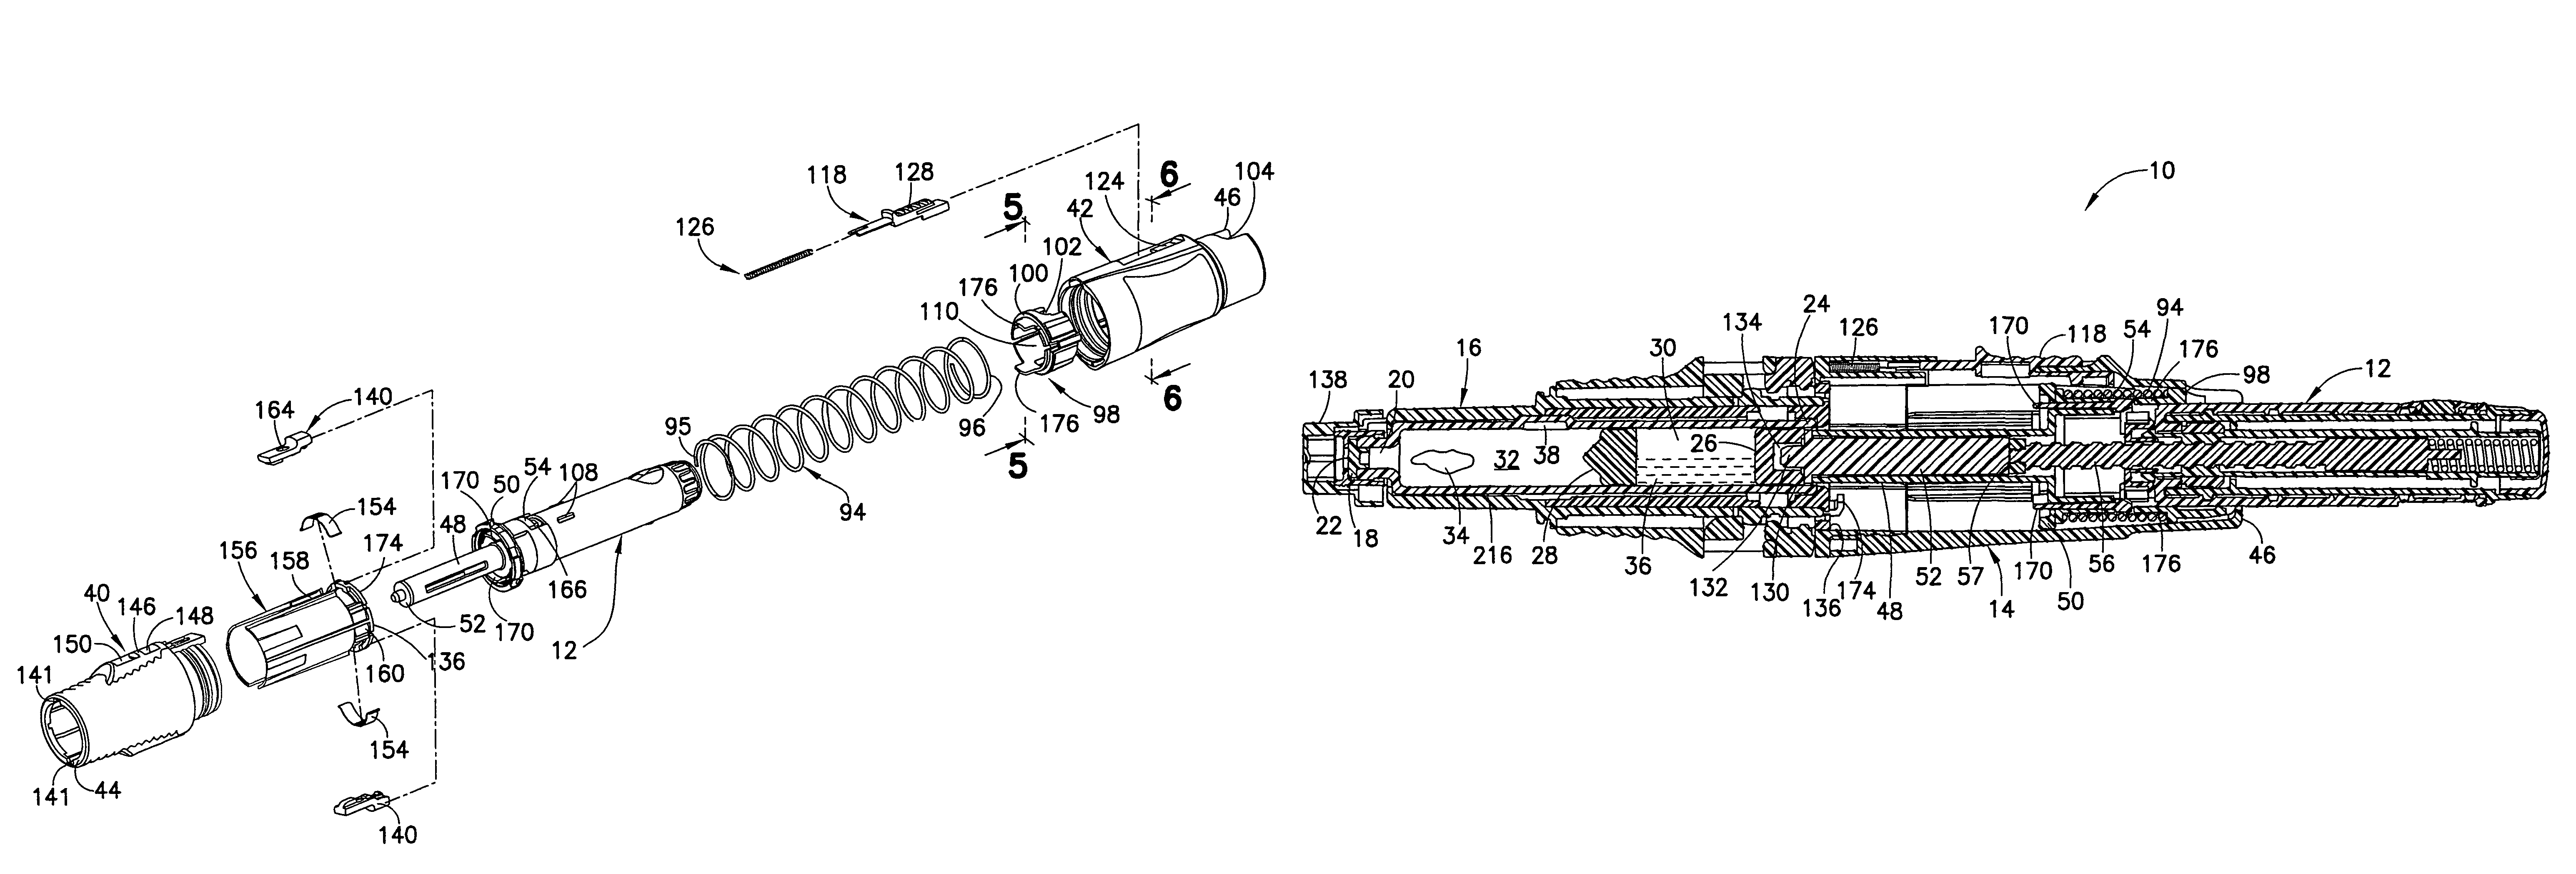 Automatic reconstitution injector device